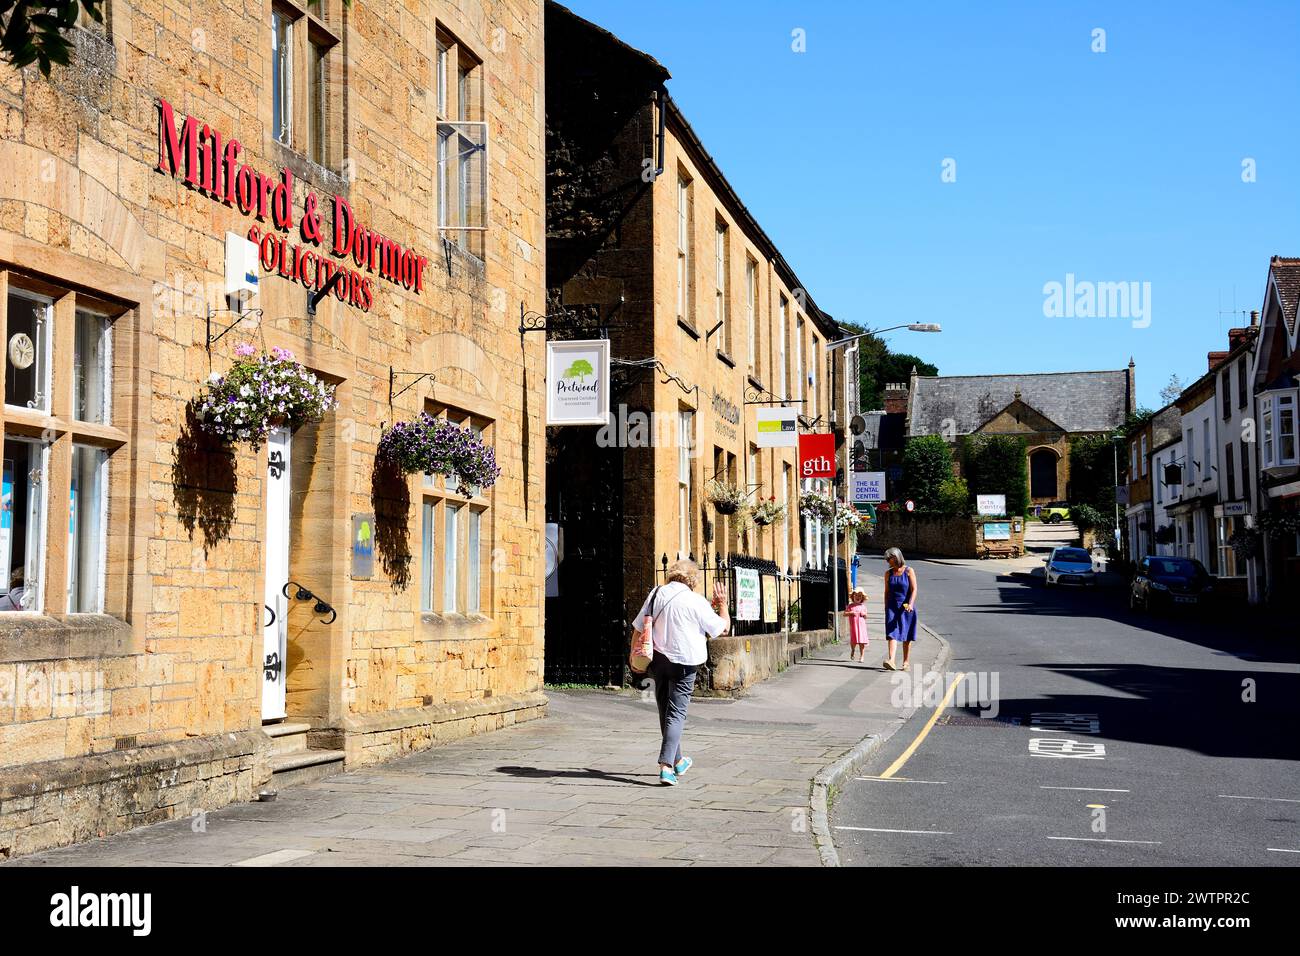 Professional businesses along East Street including a Solicitors and a dentist surgery, Ilminster, Somerset, UK, Europe. Stock Photo